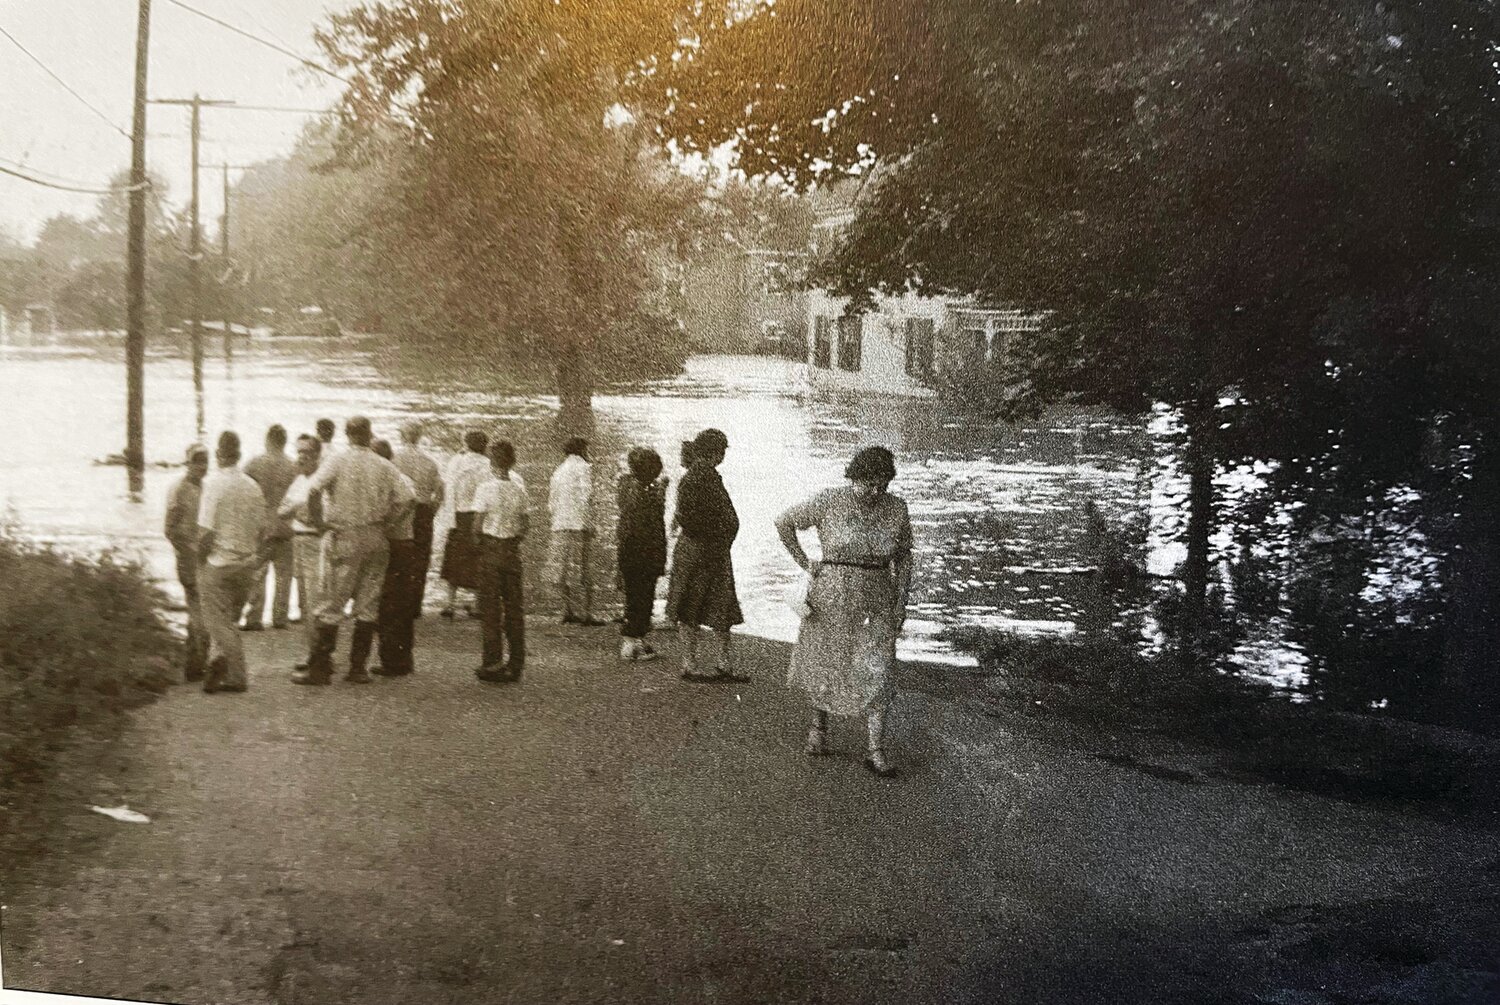 From atop a high canal bridge, residents looked down at their neighborhood during the Great Flood of 1955.